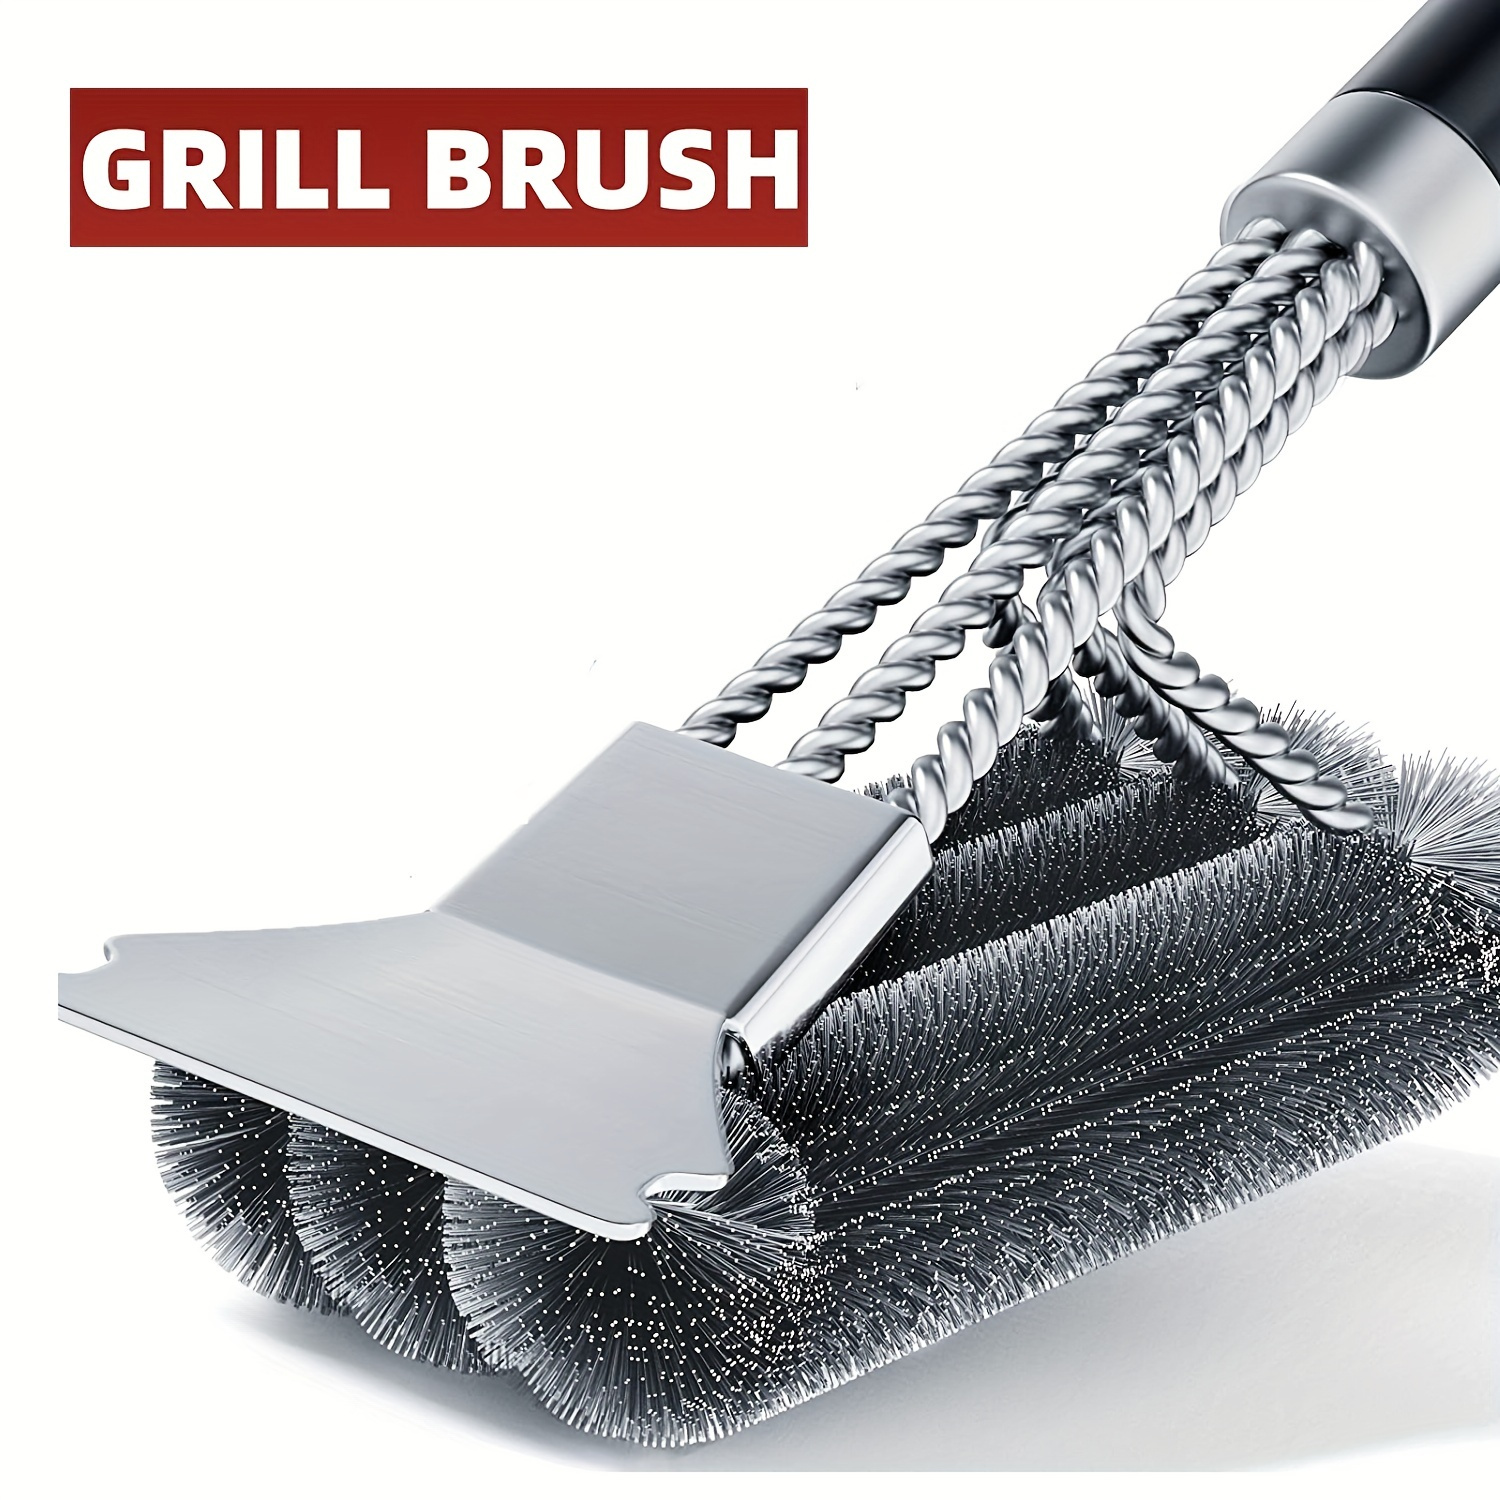  Grill Rescue BBQ Replaceable Scraper Cleaning Head, Bristle  Free - Durable and Unique Scraper Tools for Cast Iron or Stainless-Steel  Grates, Barbecue Cleaner (Grill Grate Brush with Scraper) : Patio, Lawn